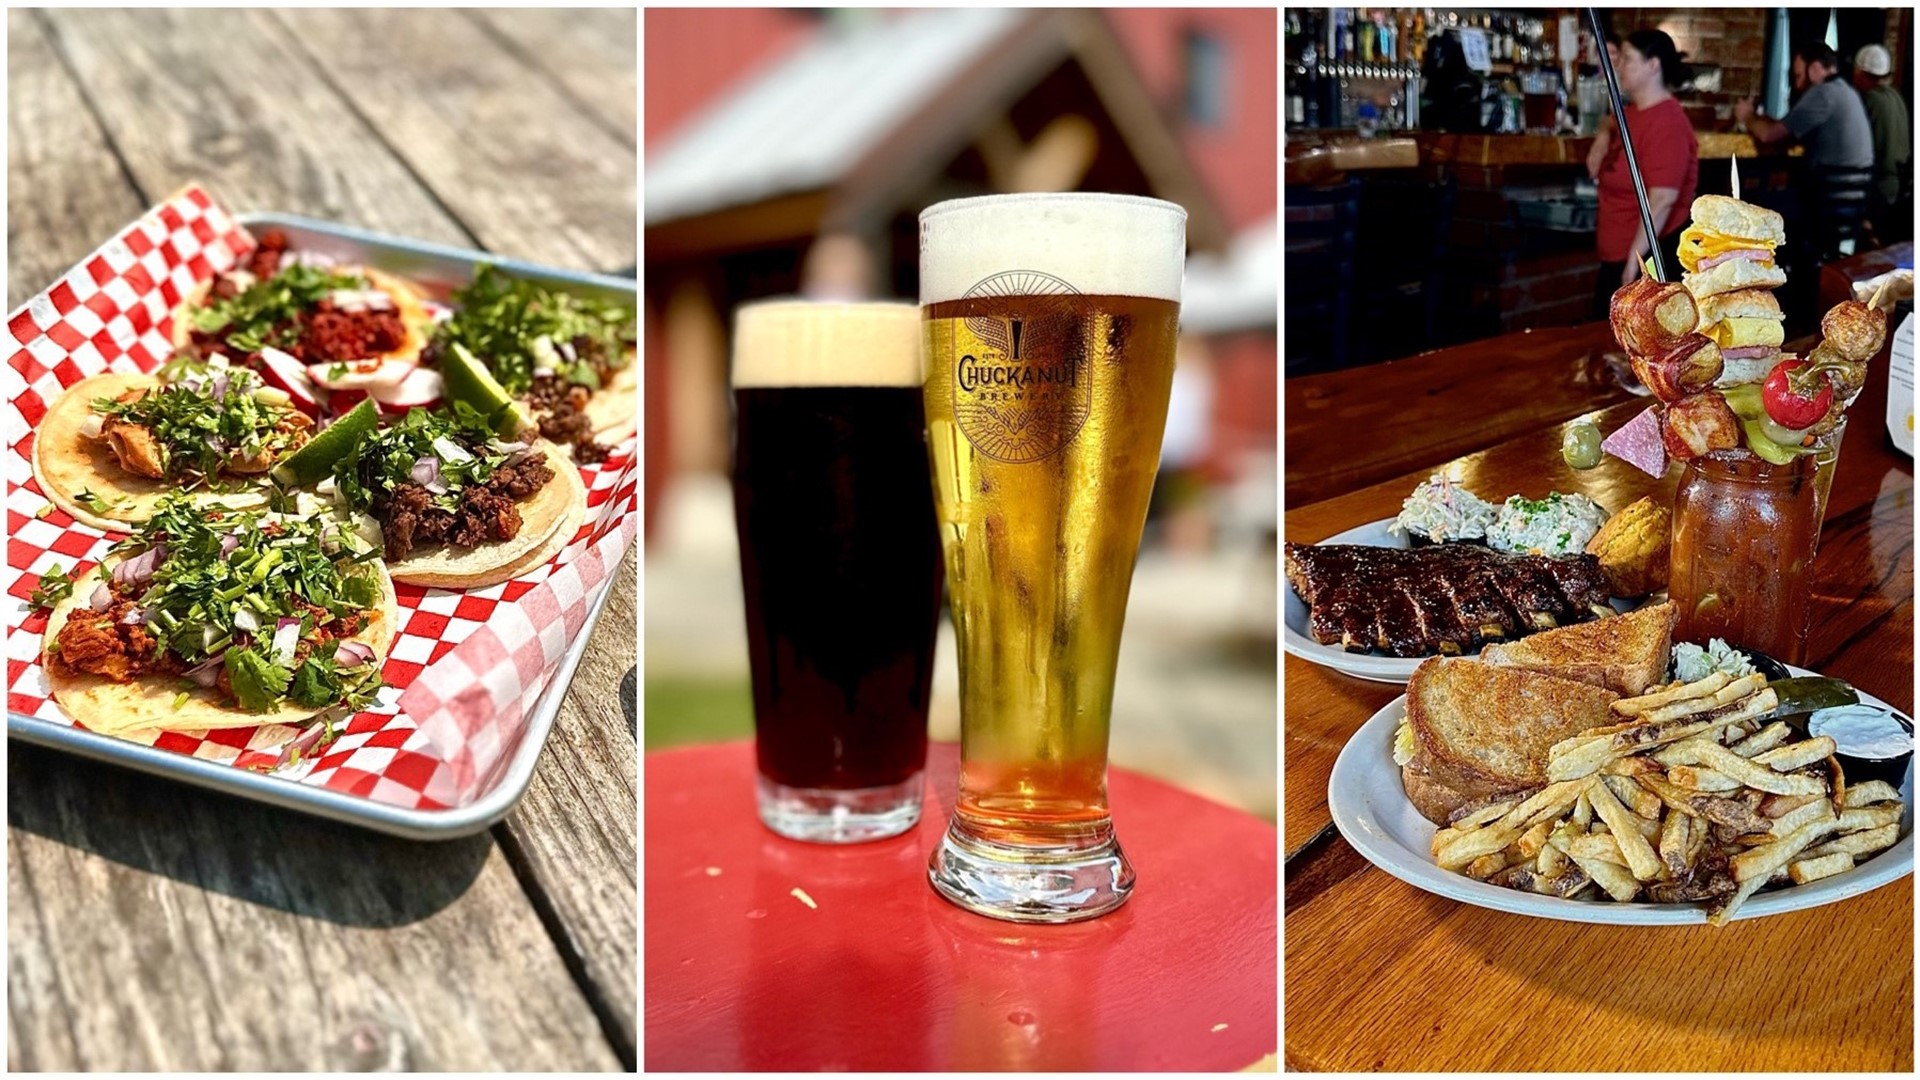 Check out our round-up of the best places to eat and drink in Burlington. Sponsored by Burlington Chamber of Commerce.